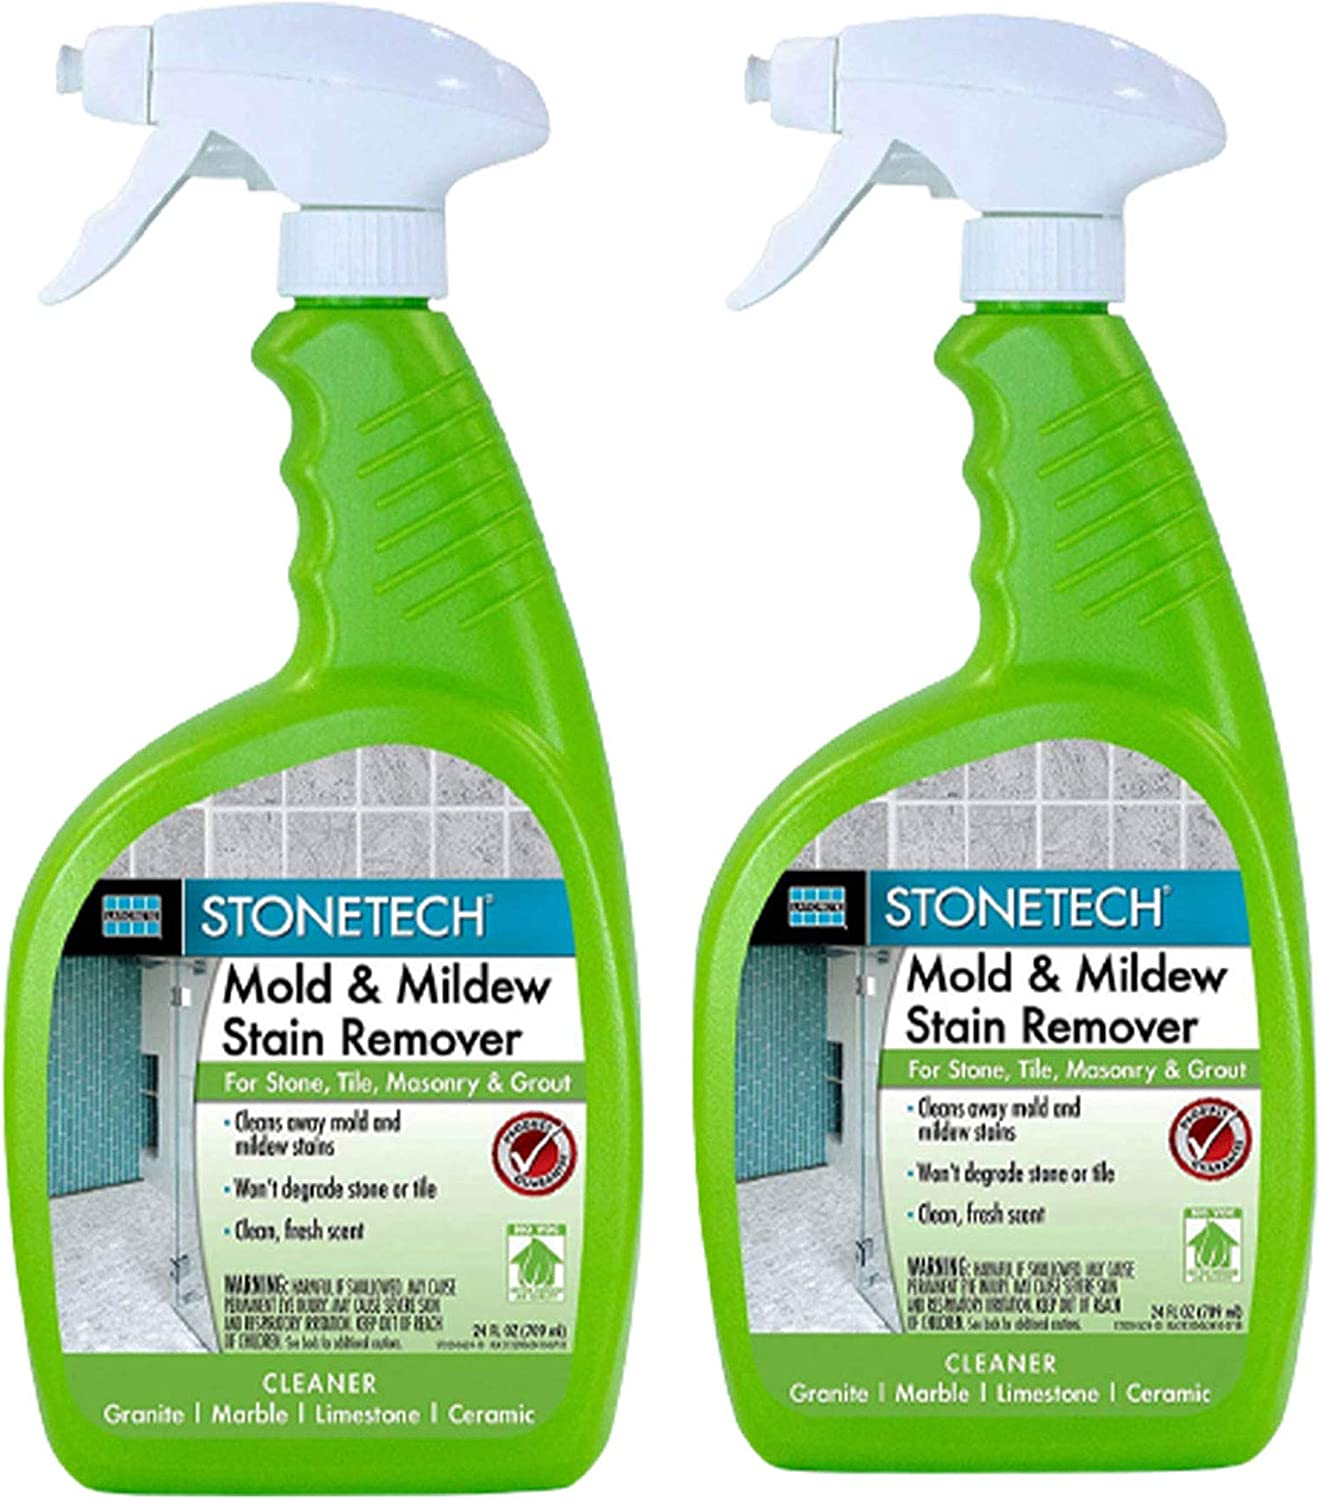 STONETECH Mold & Mildew Stain Remover, Cleaner for [...]